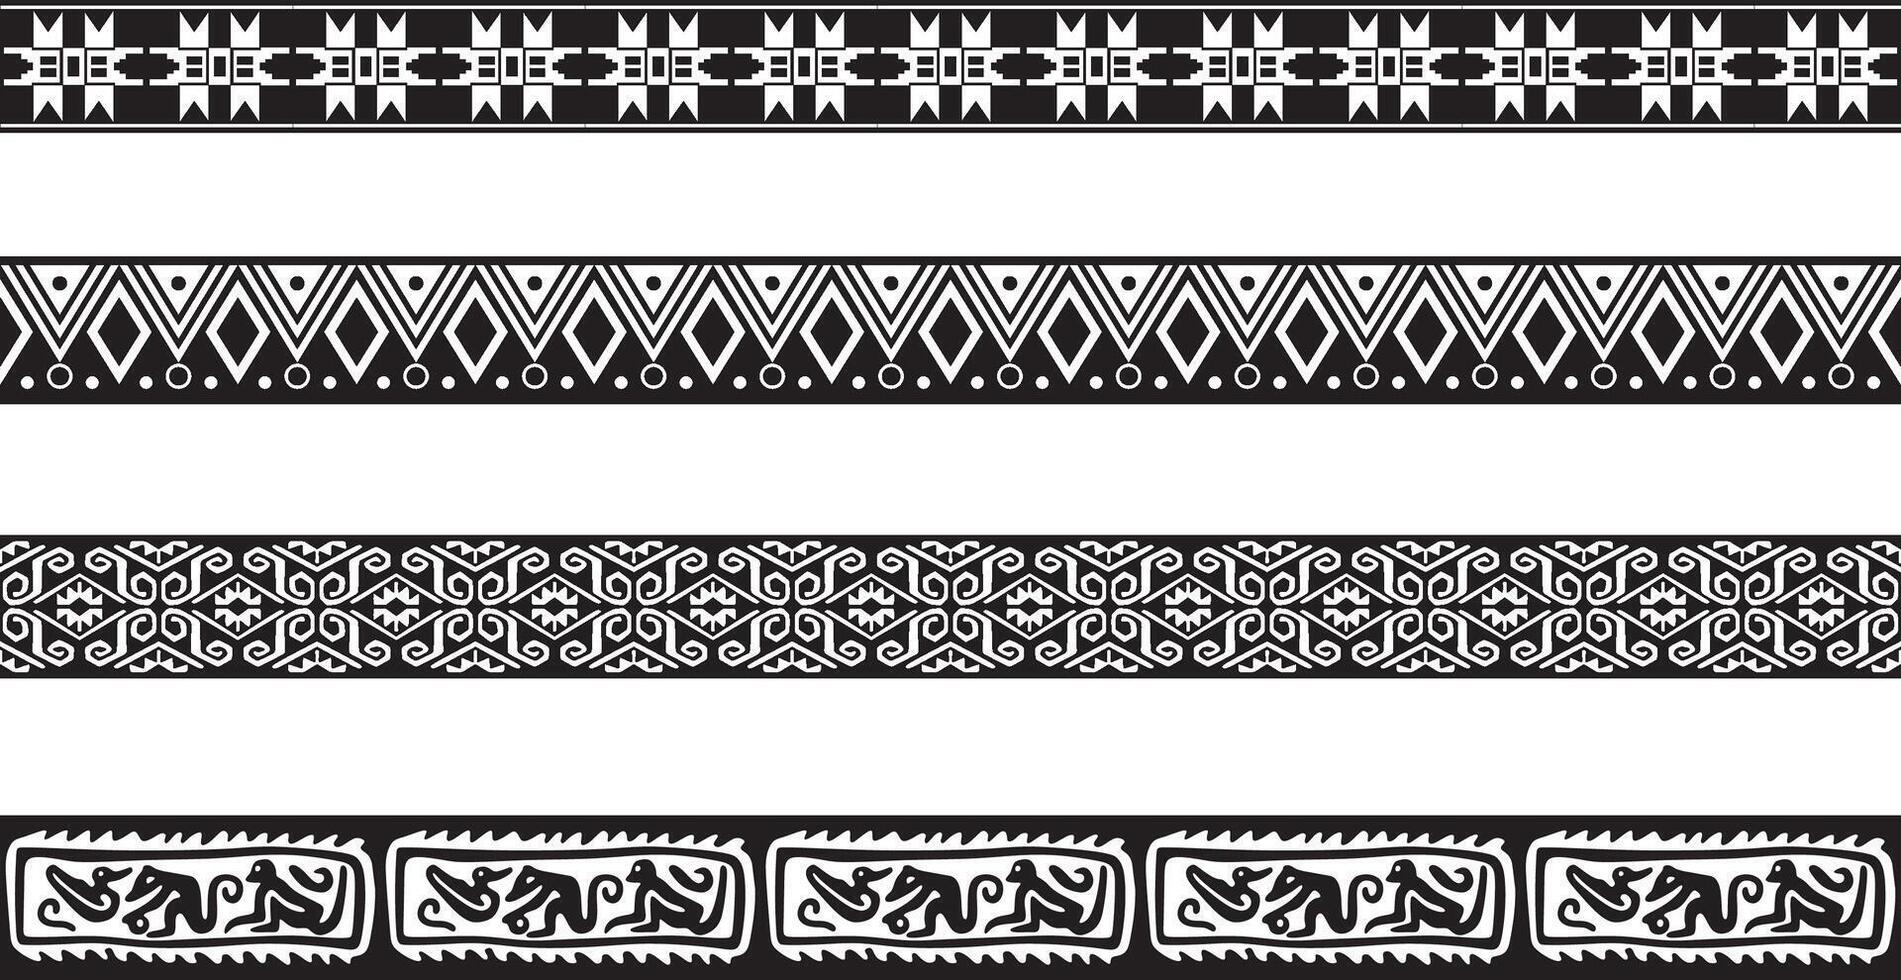 set of seamless monochrome geometric Indian ornaments. Borders, frames, patterns of indigenous peoples of the Americas, Aztec, Maya, Incas. vector